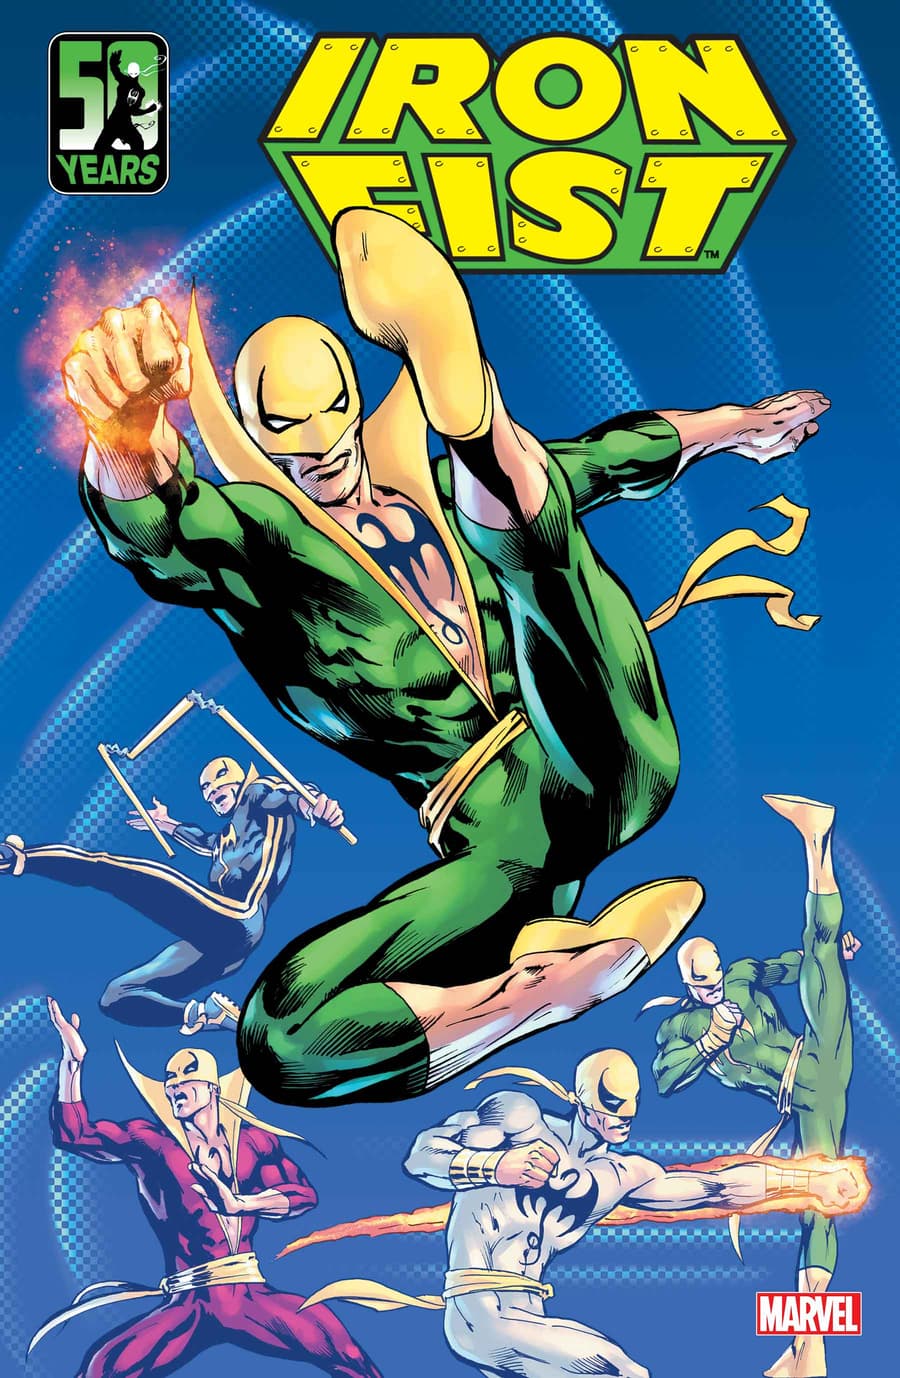 IRON FIST 50TH ANNIVERSARY SPECIAL #1 cover by Alan Davis